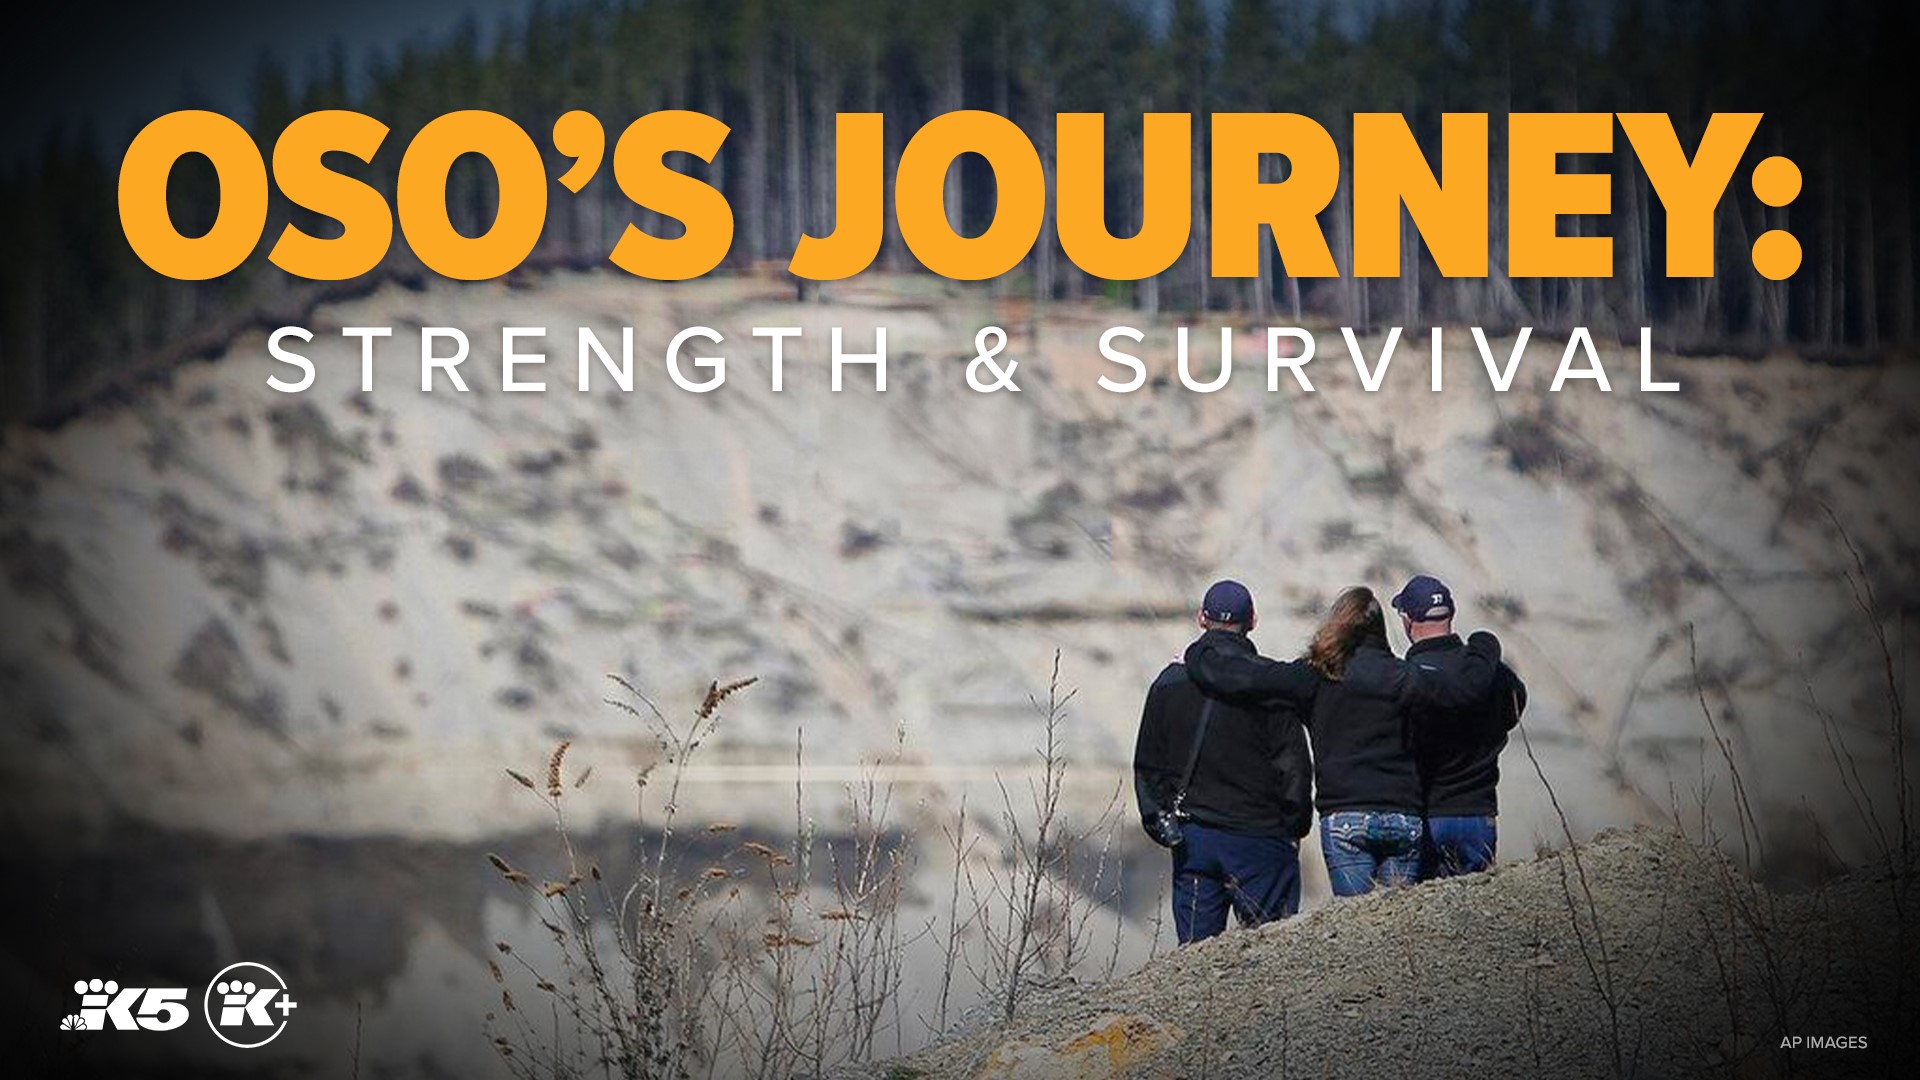 On the first anniversary of the deadly Oso landslide, we checked in with survivors, first responders, and those impacted by the disaster. (Originally aired in 2015)